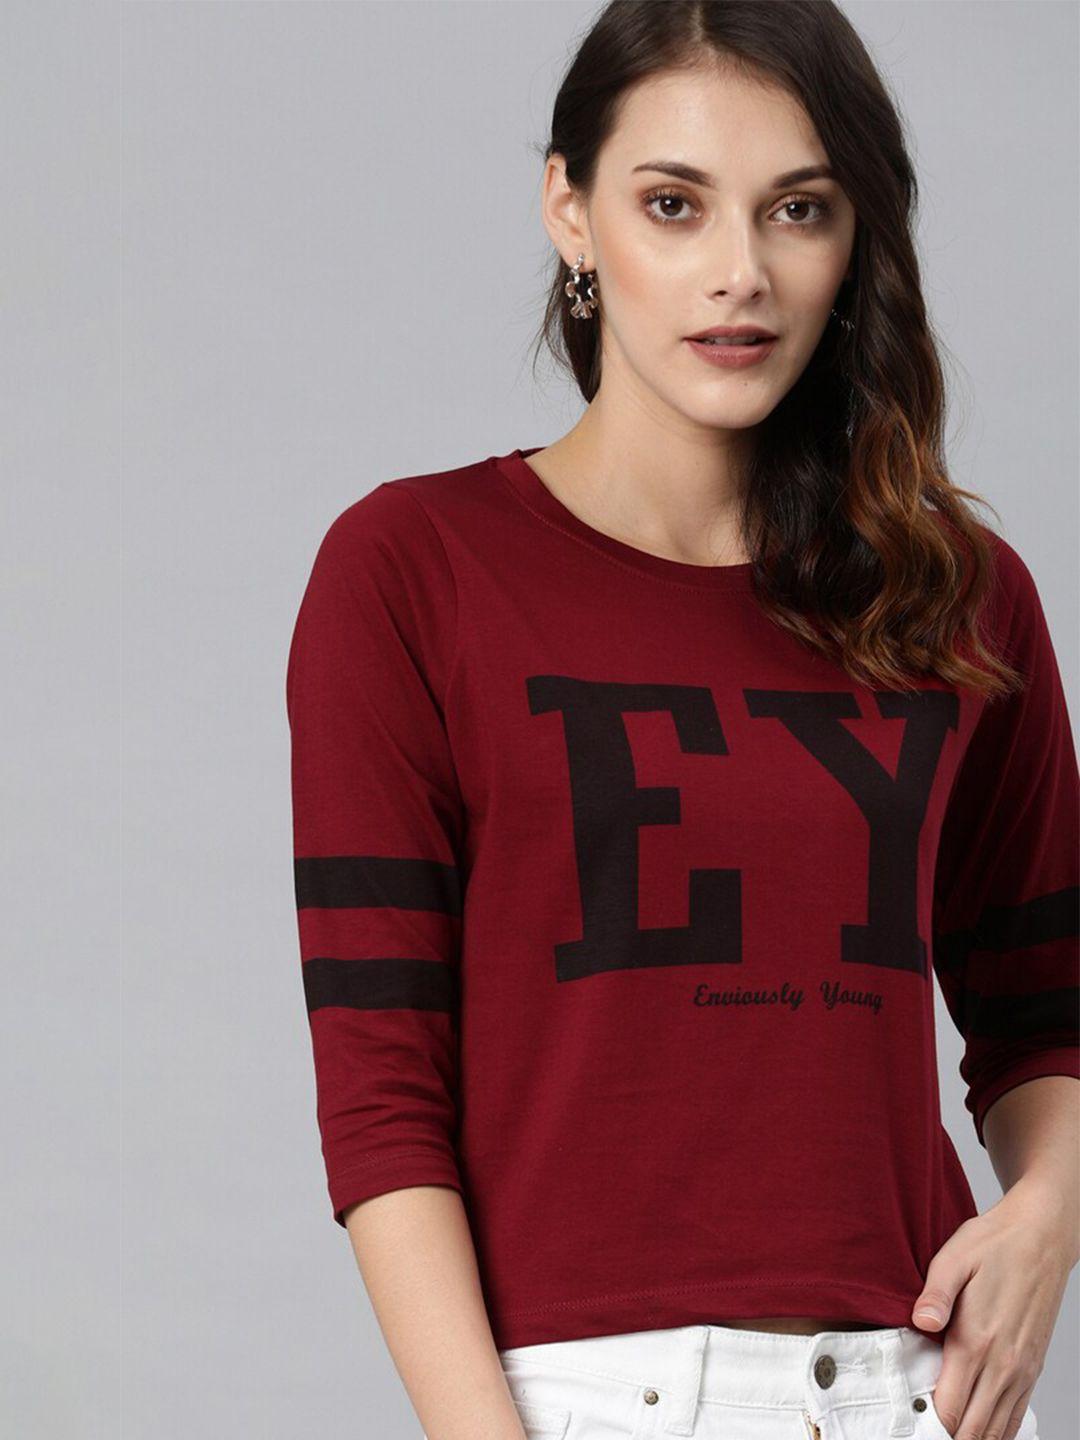 enviously young women maroon typography printed t-shirt